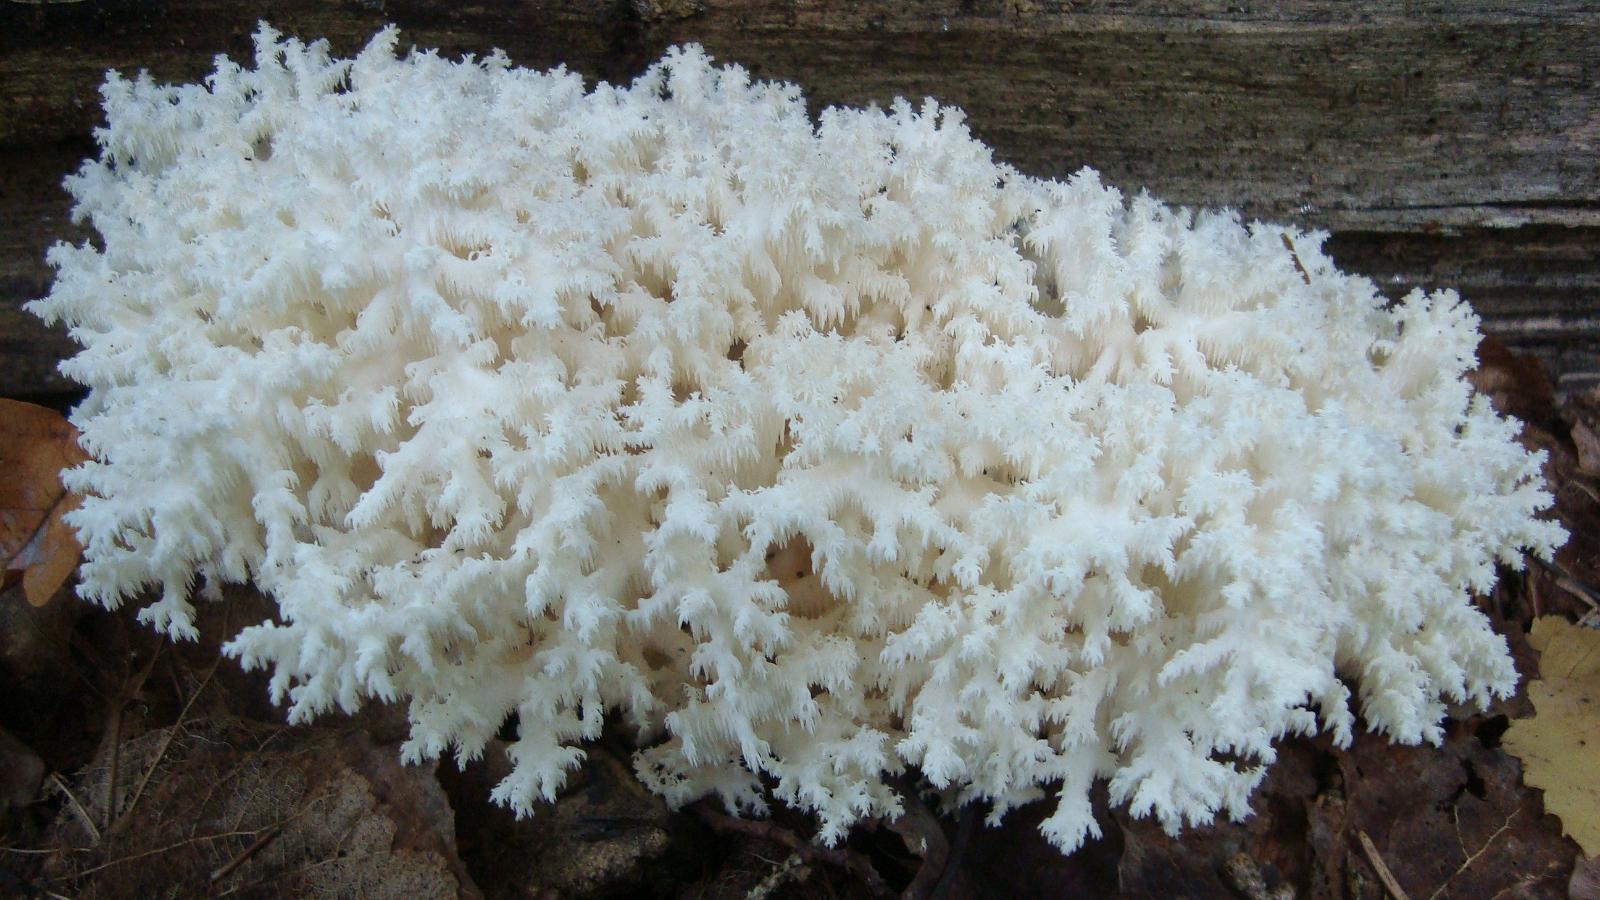 One of the most eye-catching mushrooms of Estonian forests - the coral tooth fungus, or Hericium coralloides